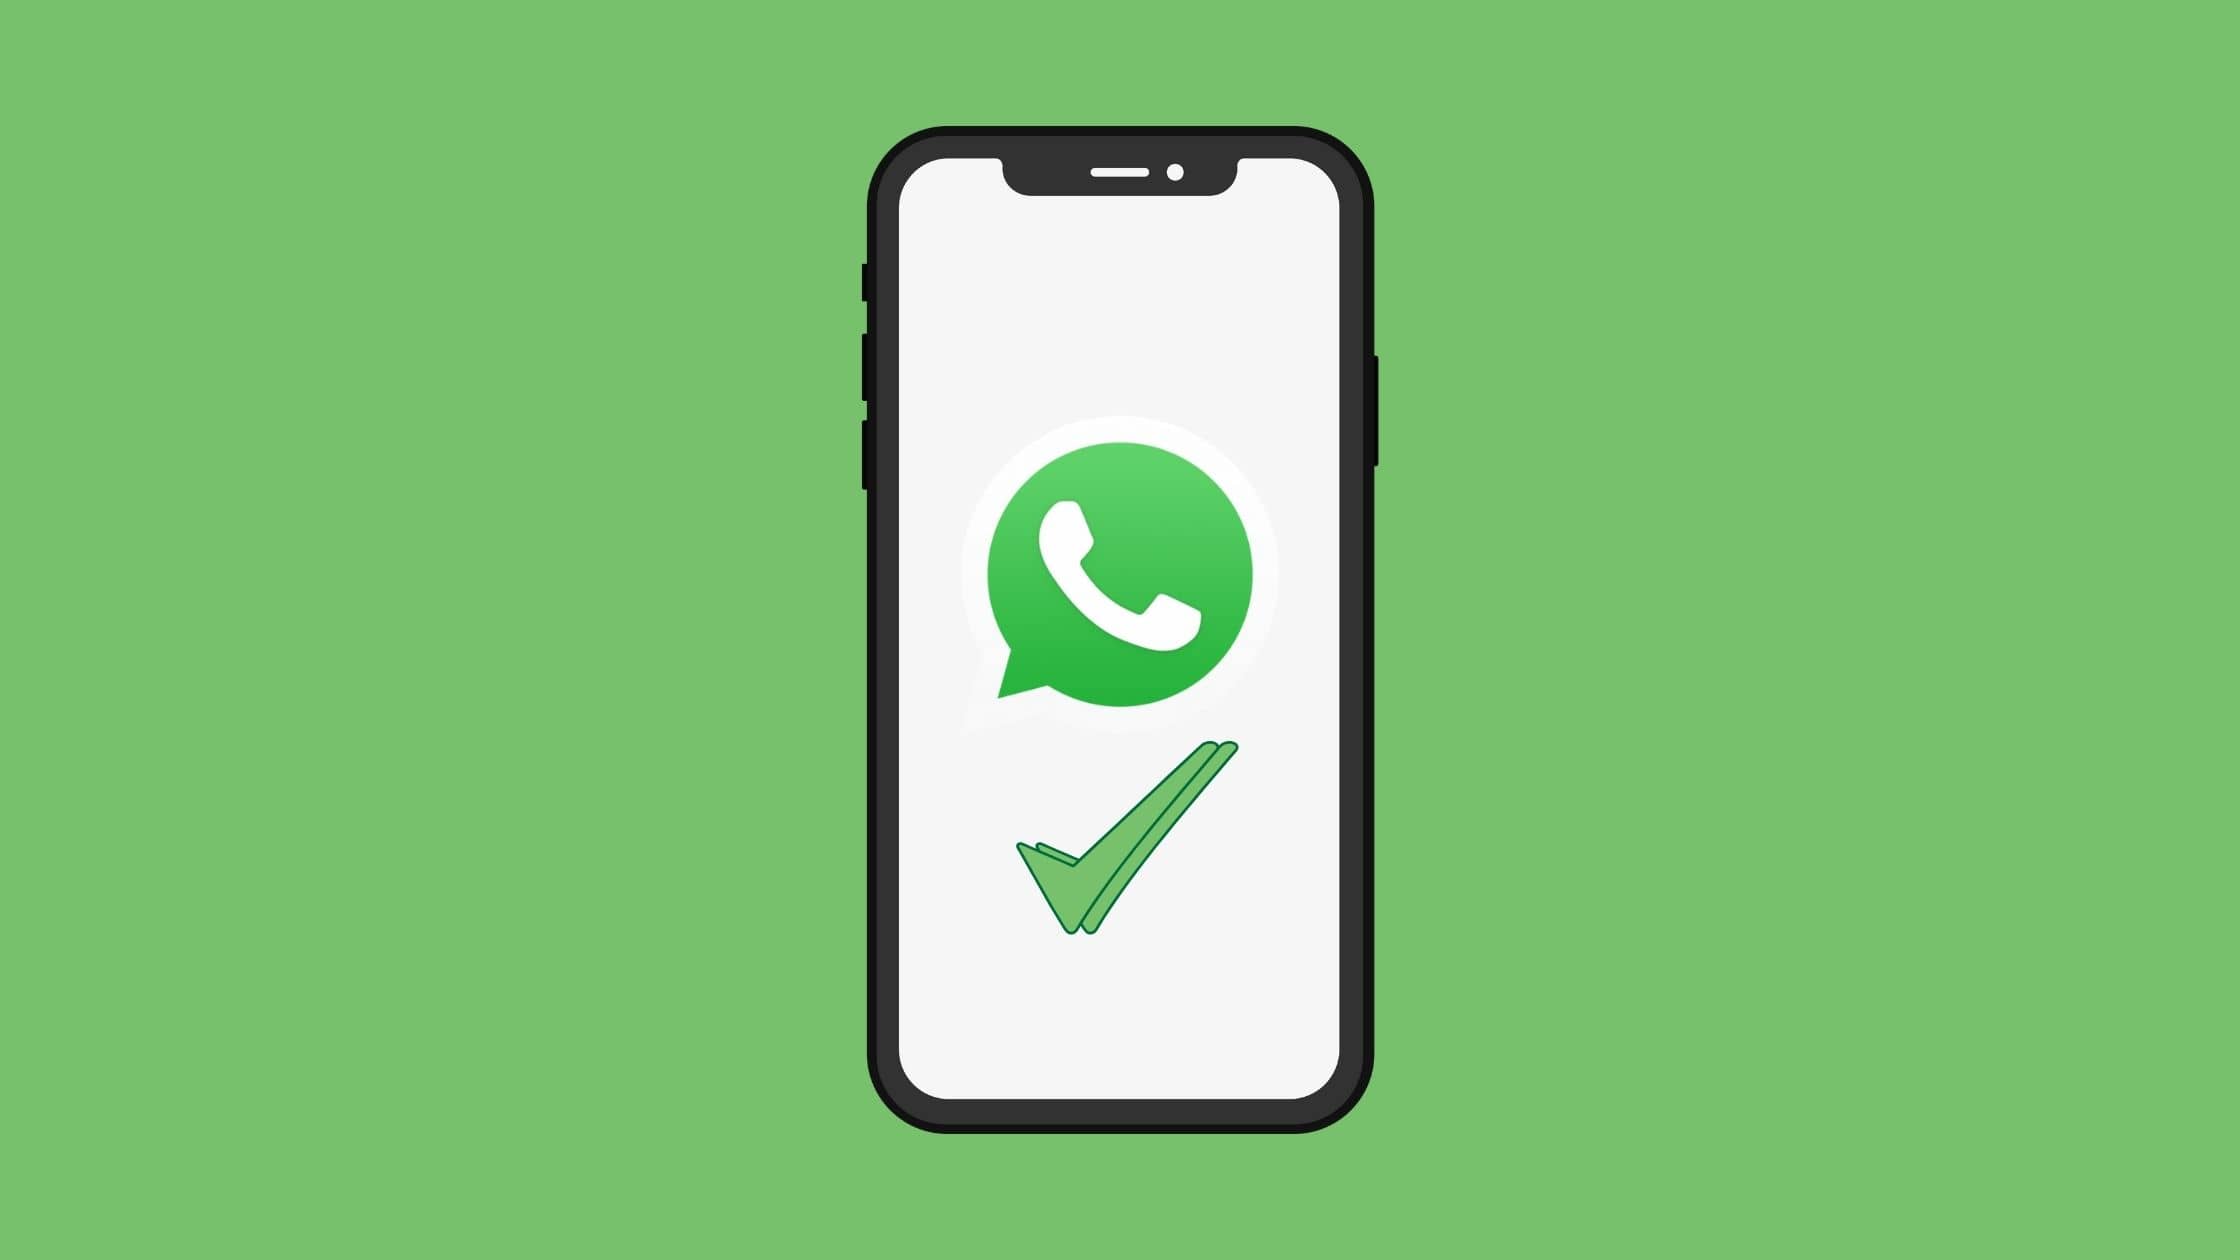 How to Hide WhatsApp Last Seen from Some Contacts